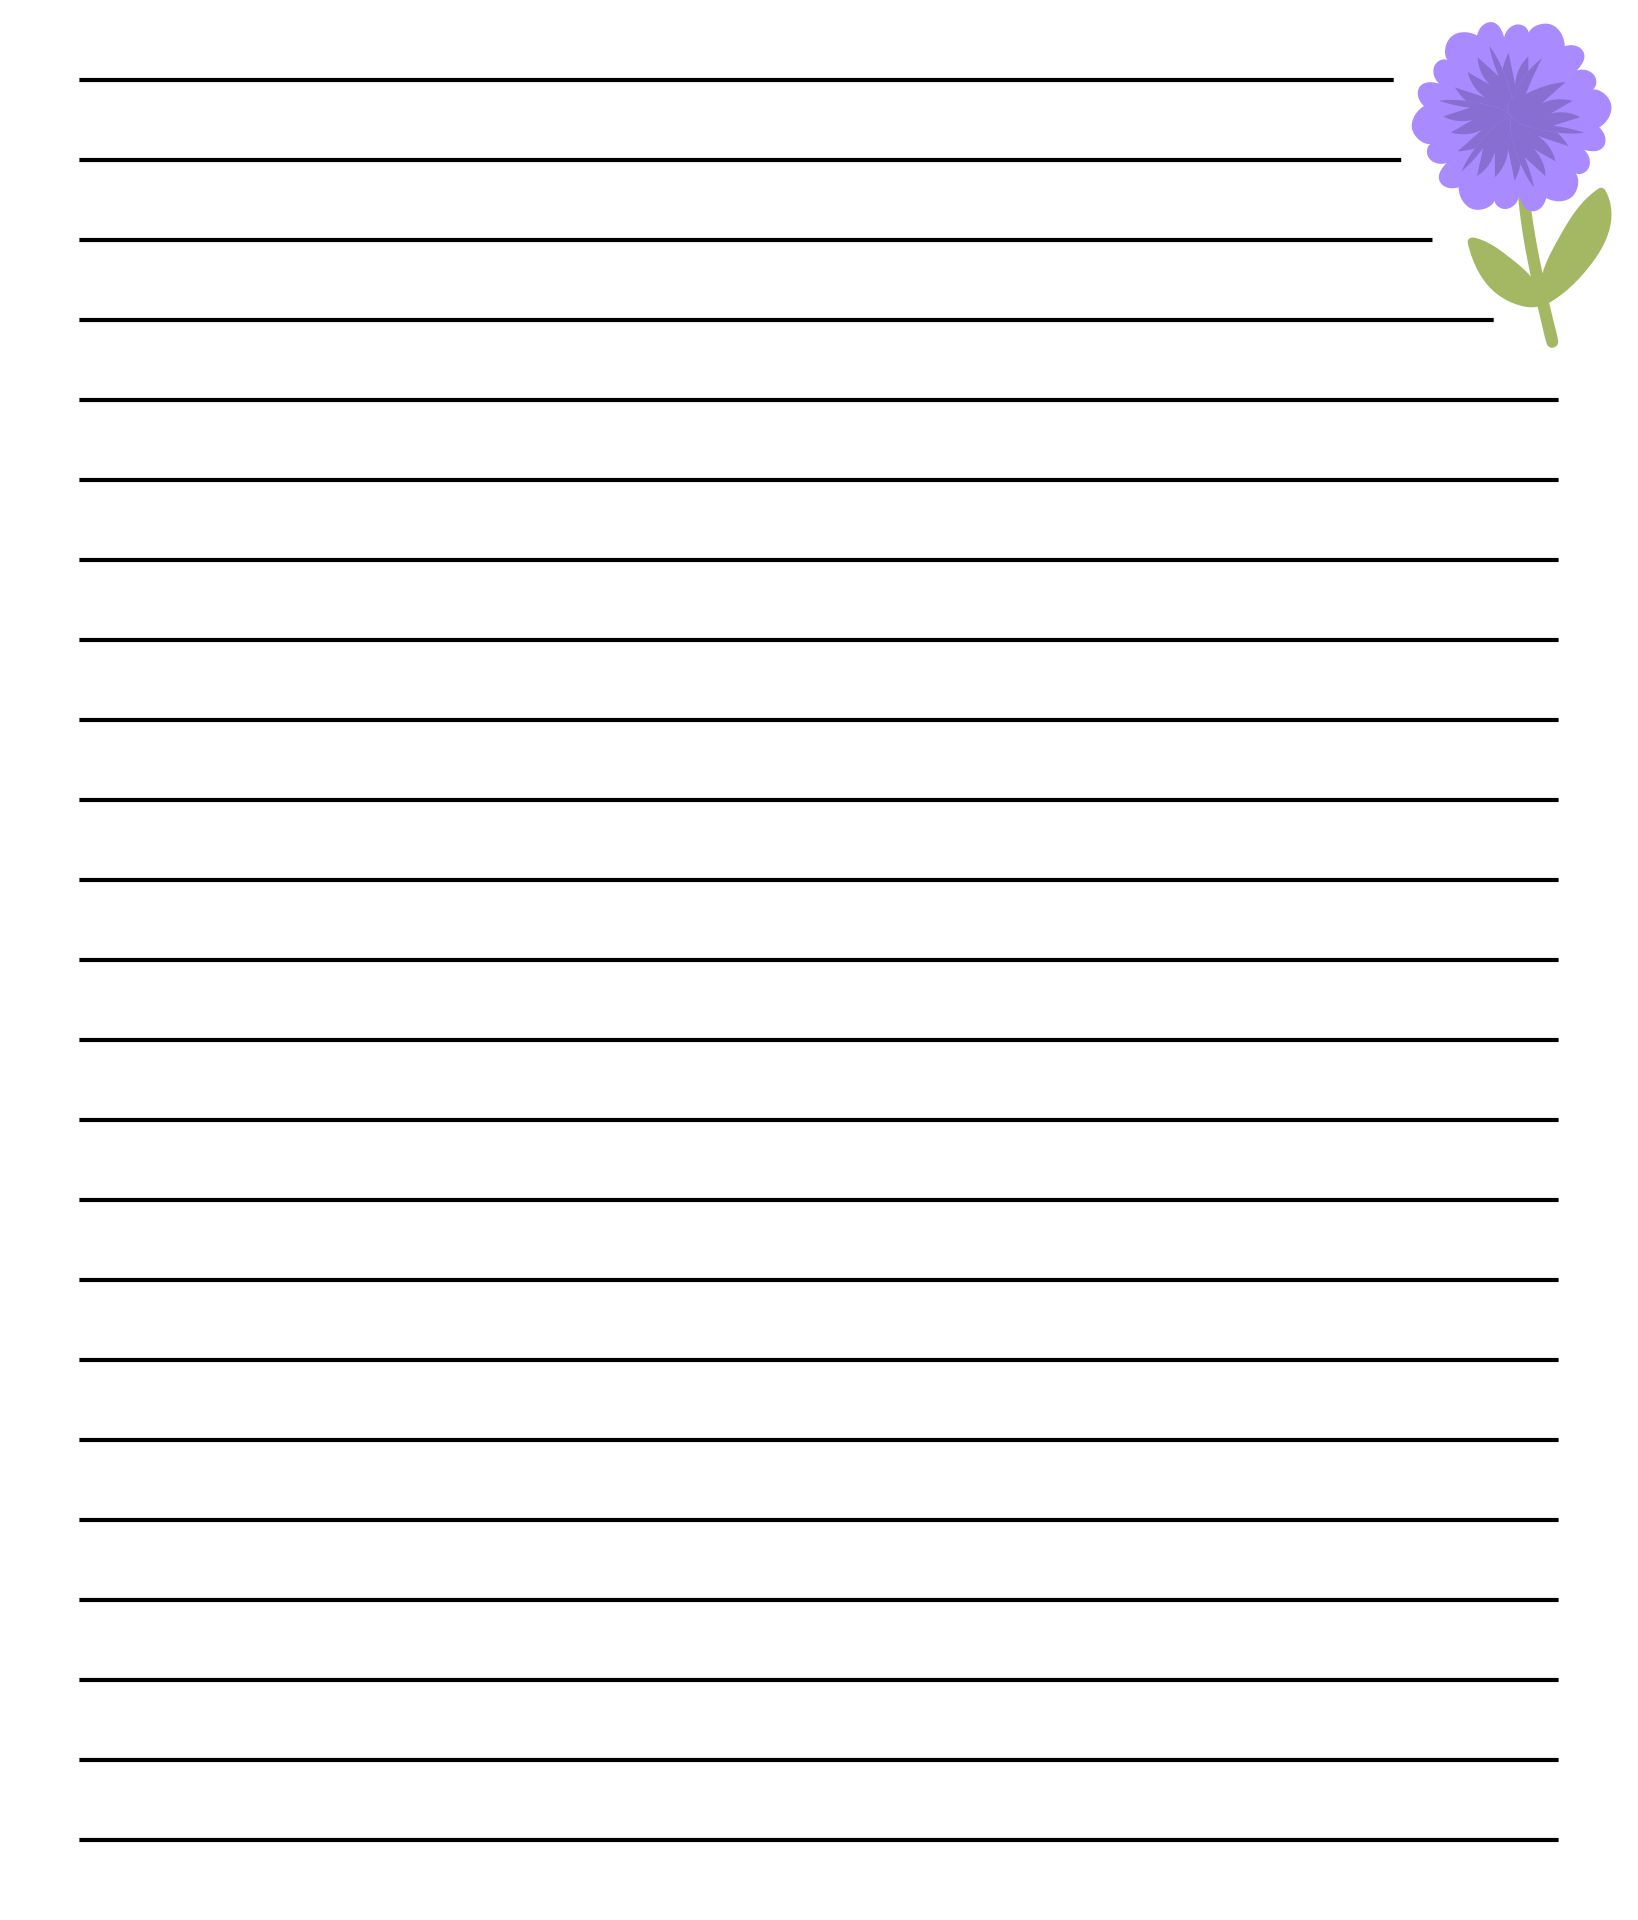 Printable Letter Writing Paper_82361